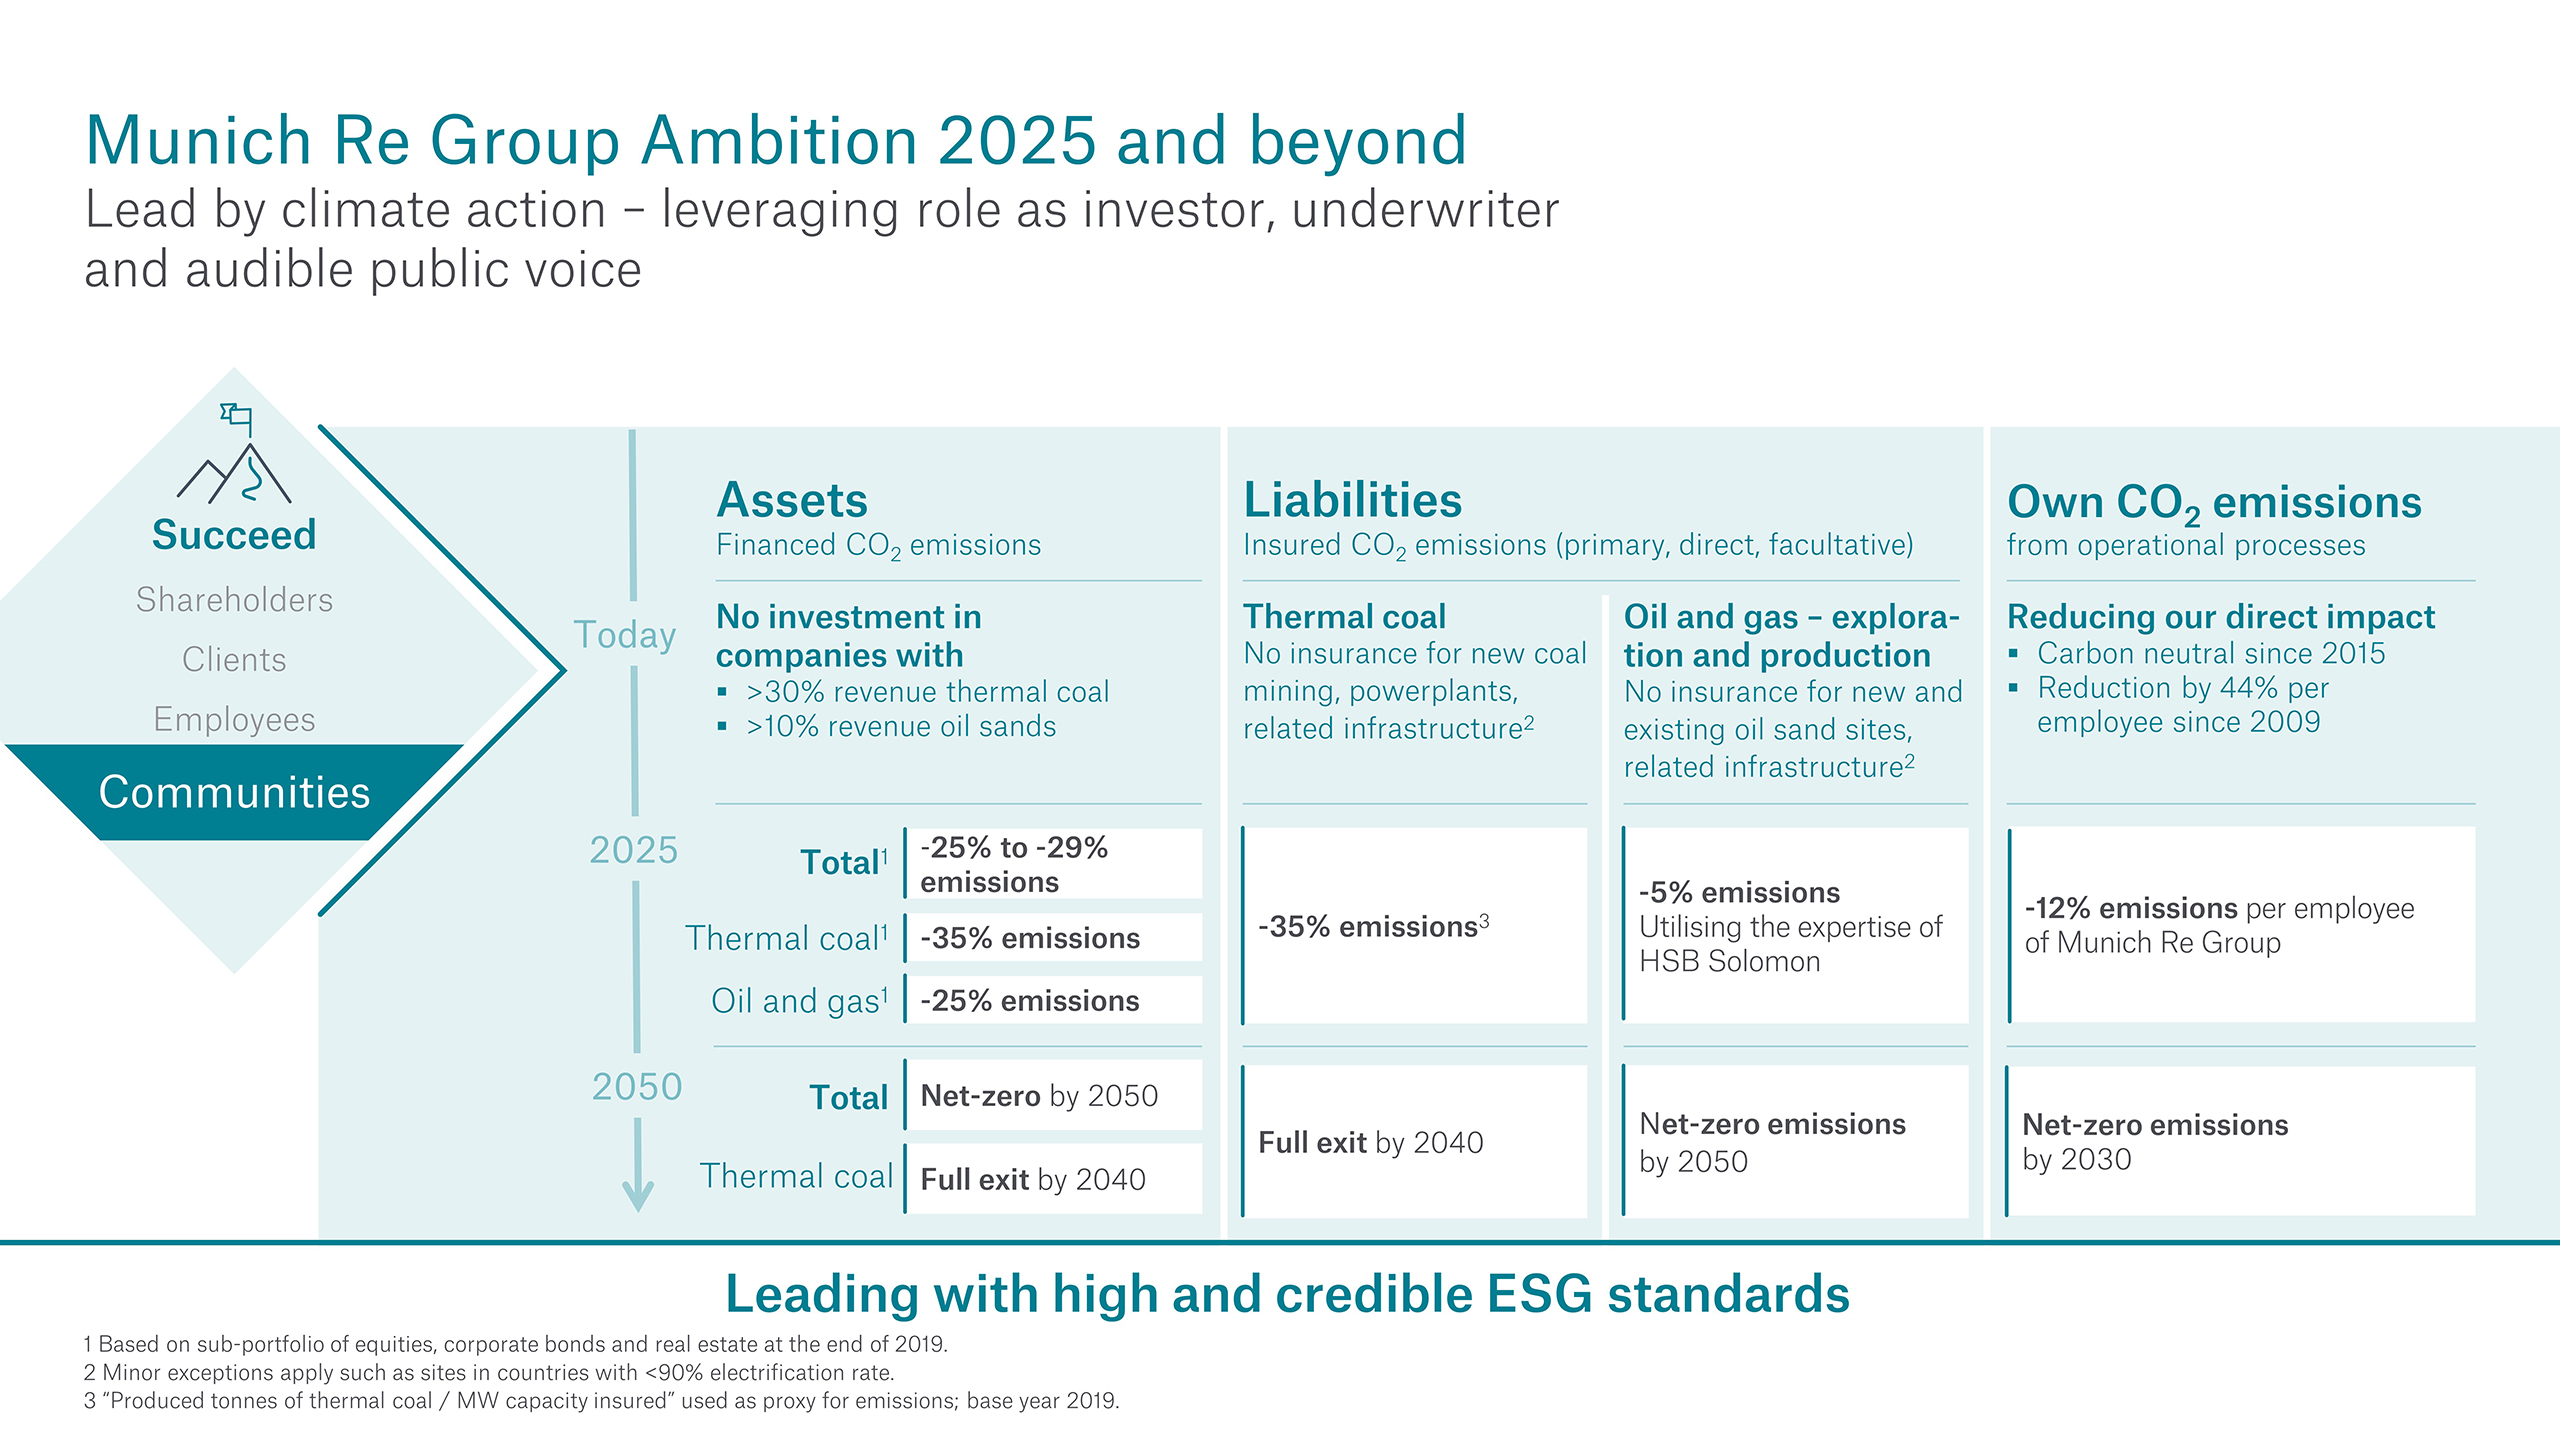 Ambition 2025 and beyond